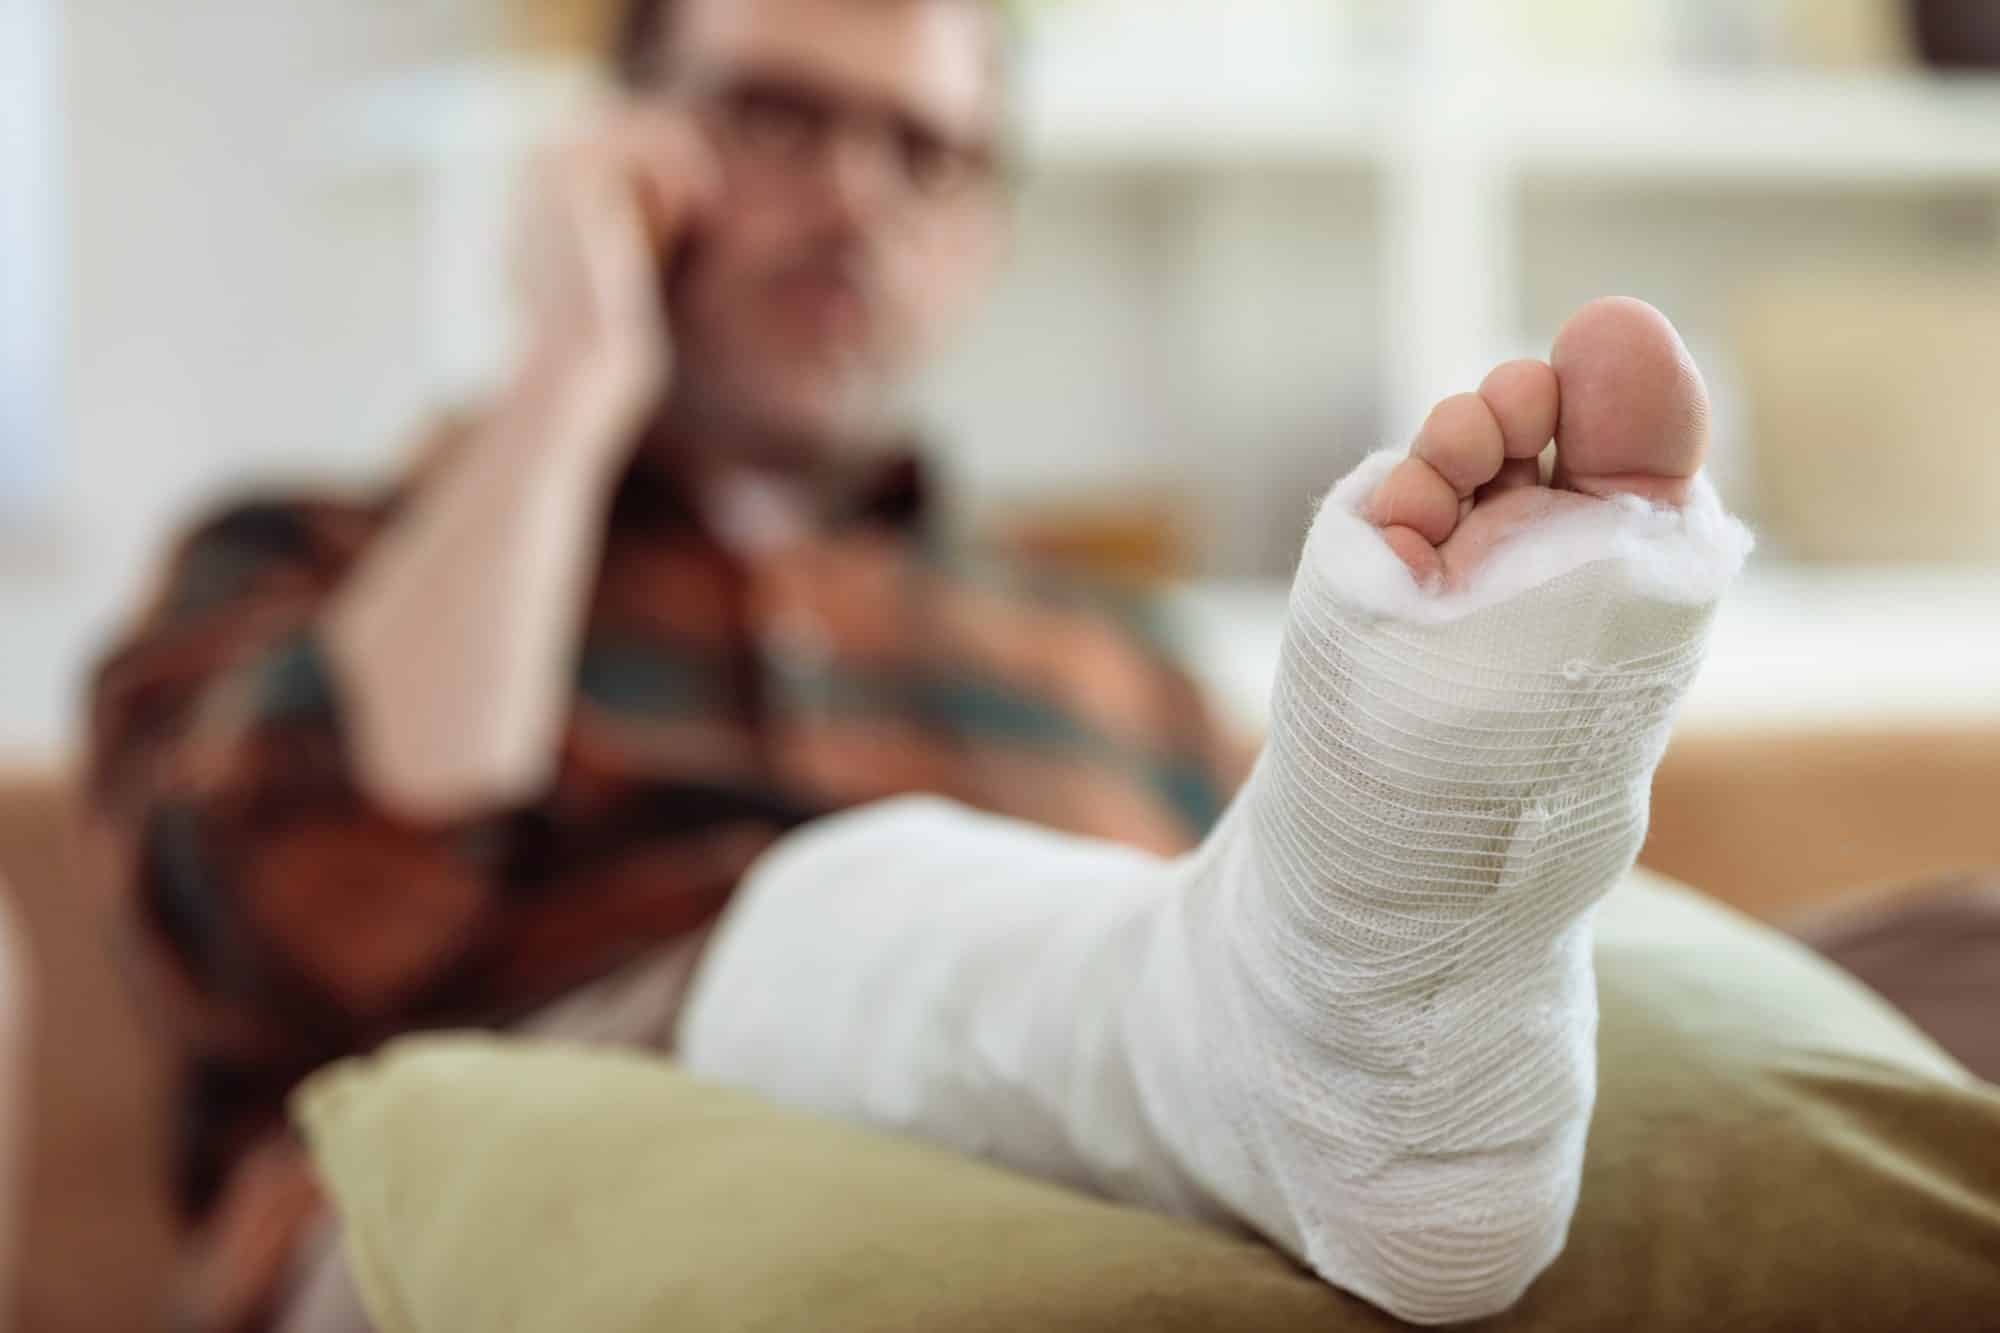 Mature man sits on the couch and talks on the phone while resting his broken foot.